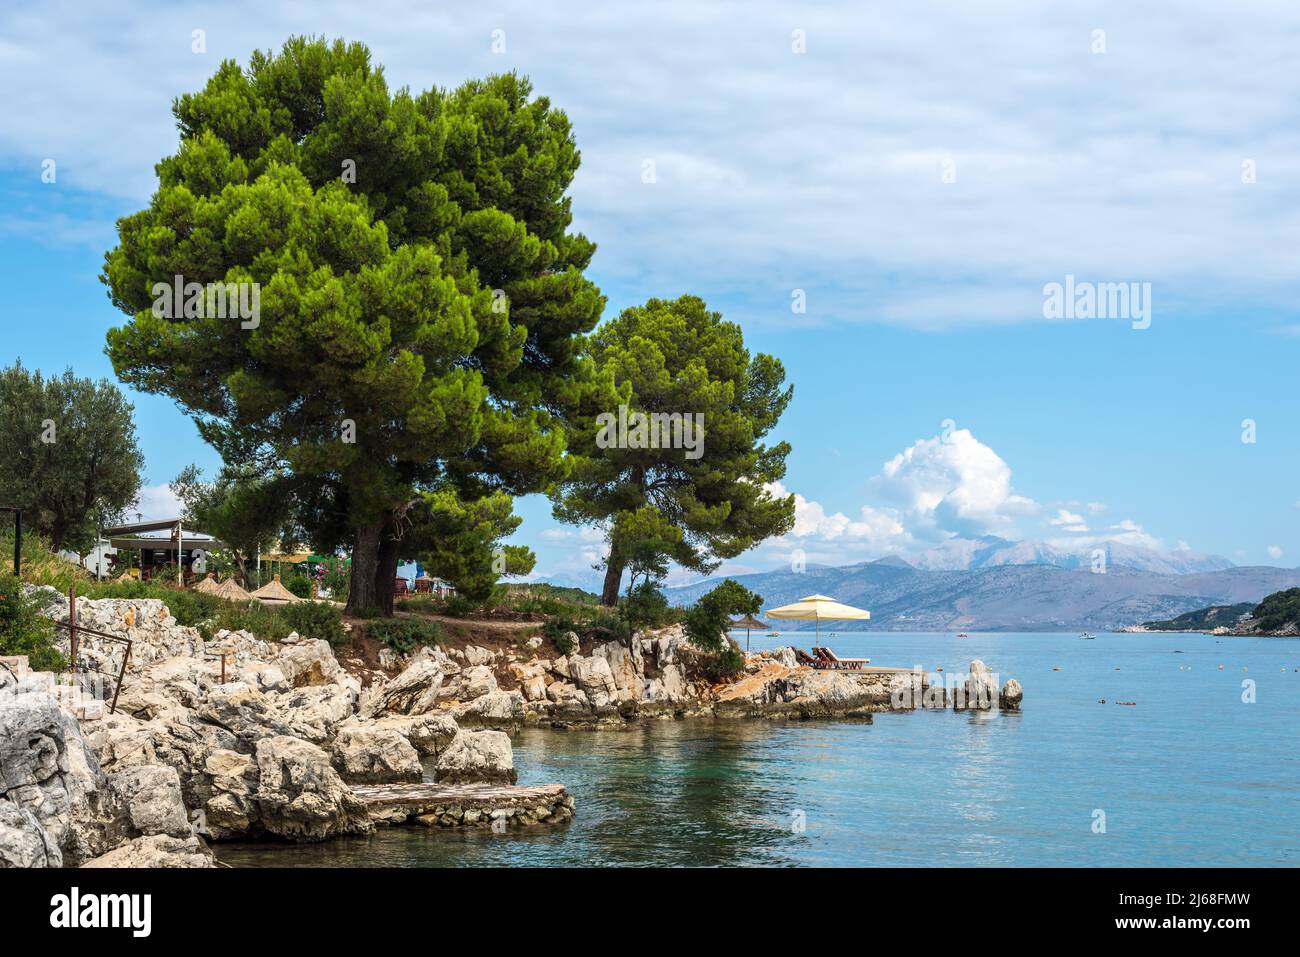 Ksamil, Albania - September 9, 2021: Seascape with an umbrellas on the beach and a tree on a rocky shore in Ksamil, Albania. Beautiful destinations. T Stock Photo